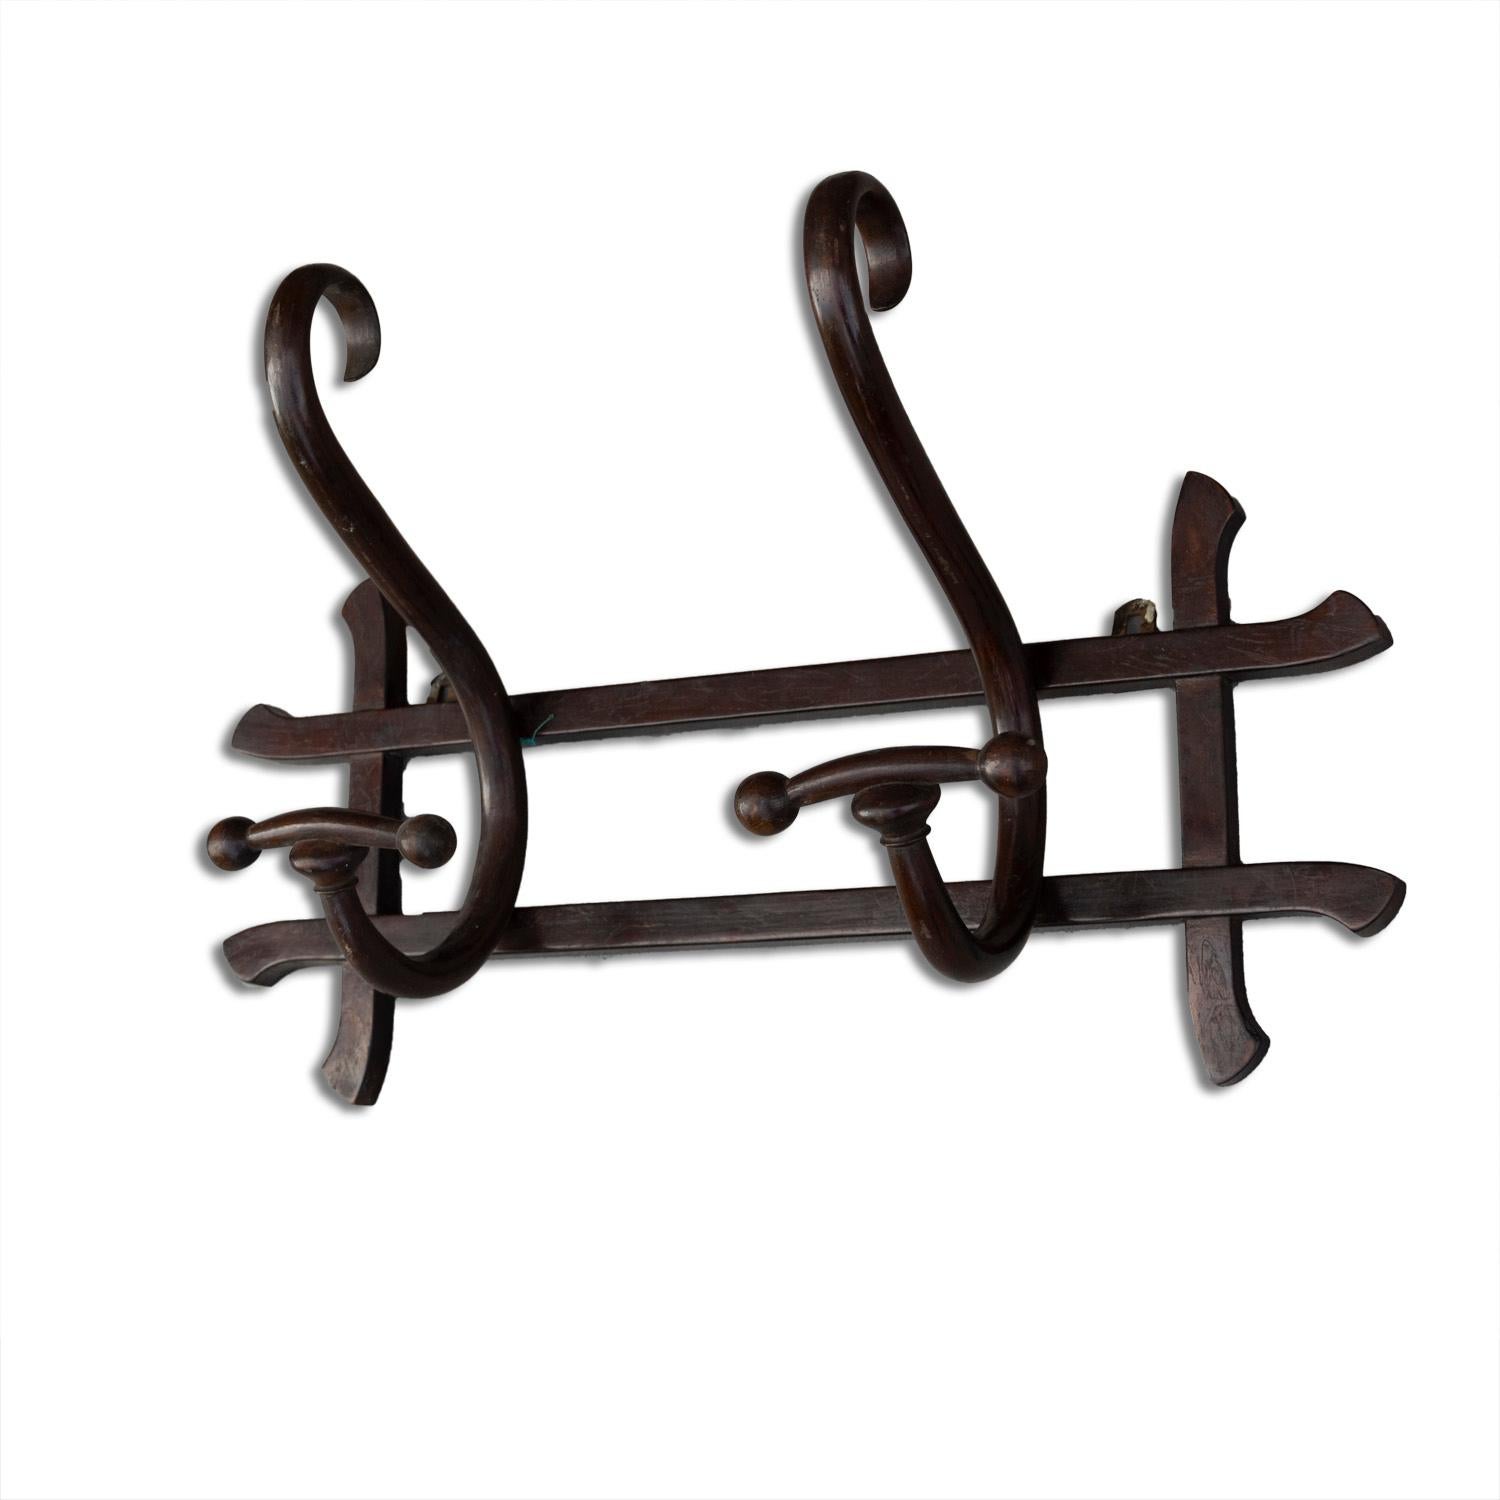 Austrian Vienna Secession Bentwood Coat Rack by Thonet, 1900